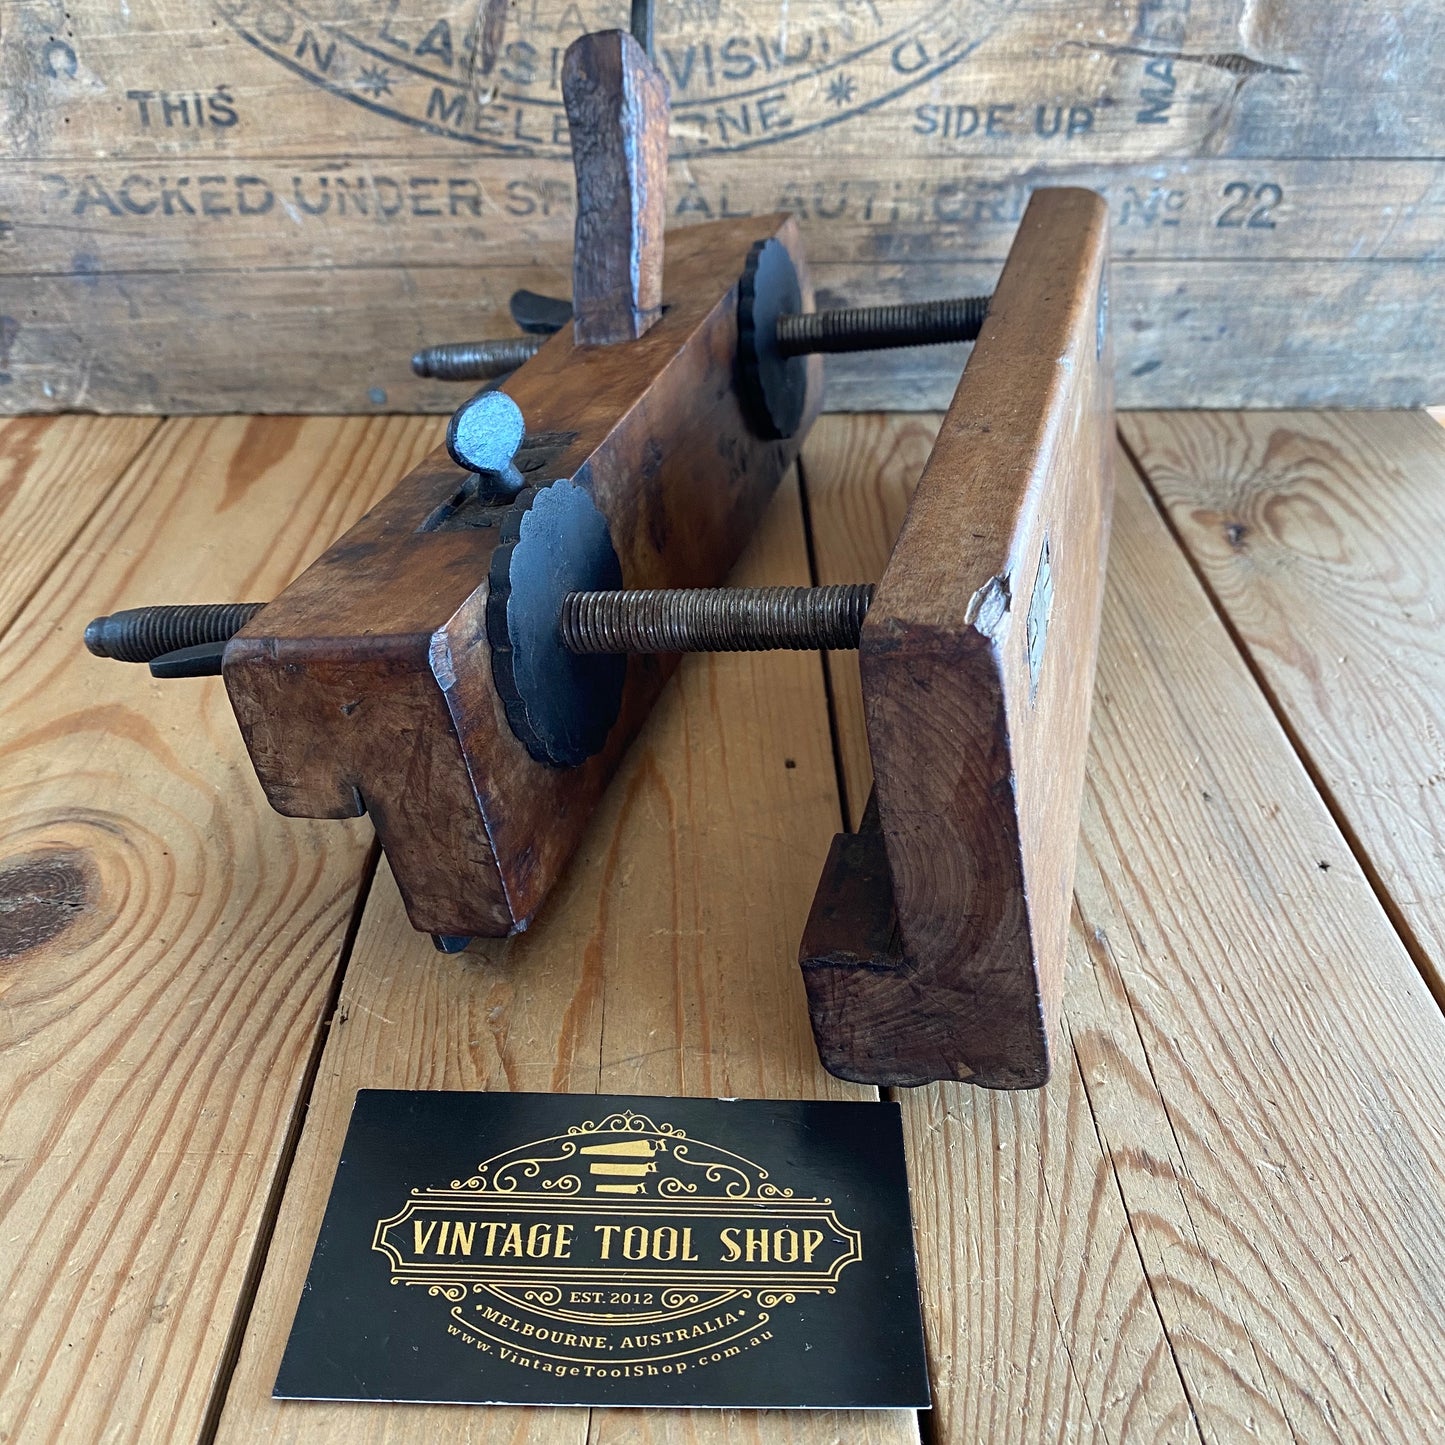 Antique Early FRENCH Screw Stem PLOUGH PLANE Y1900